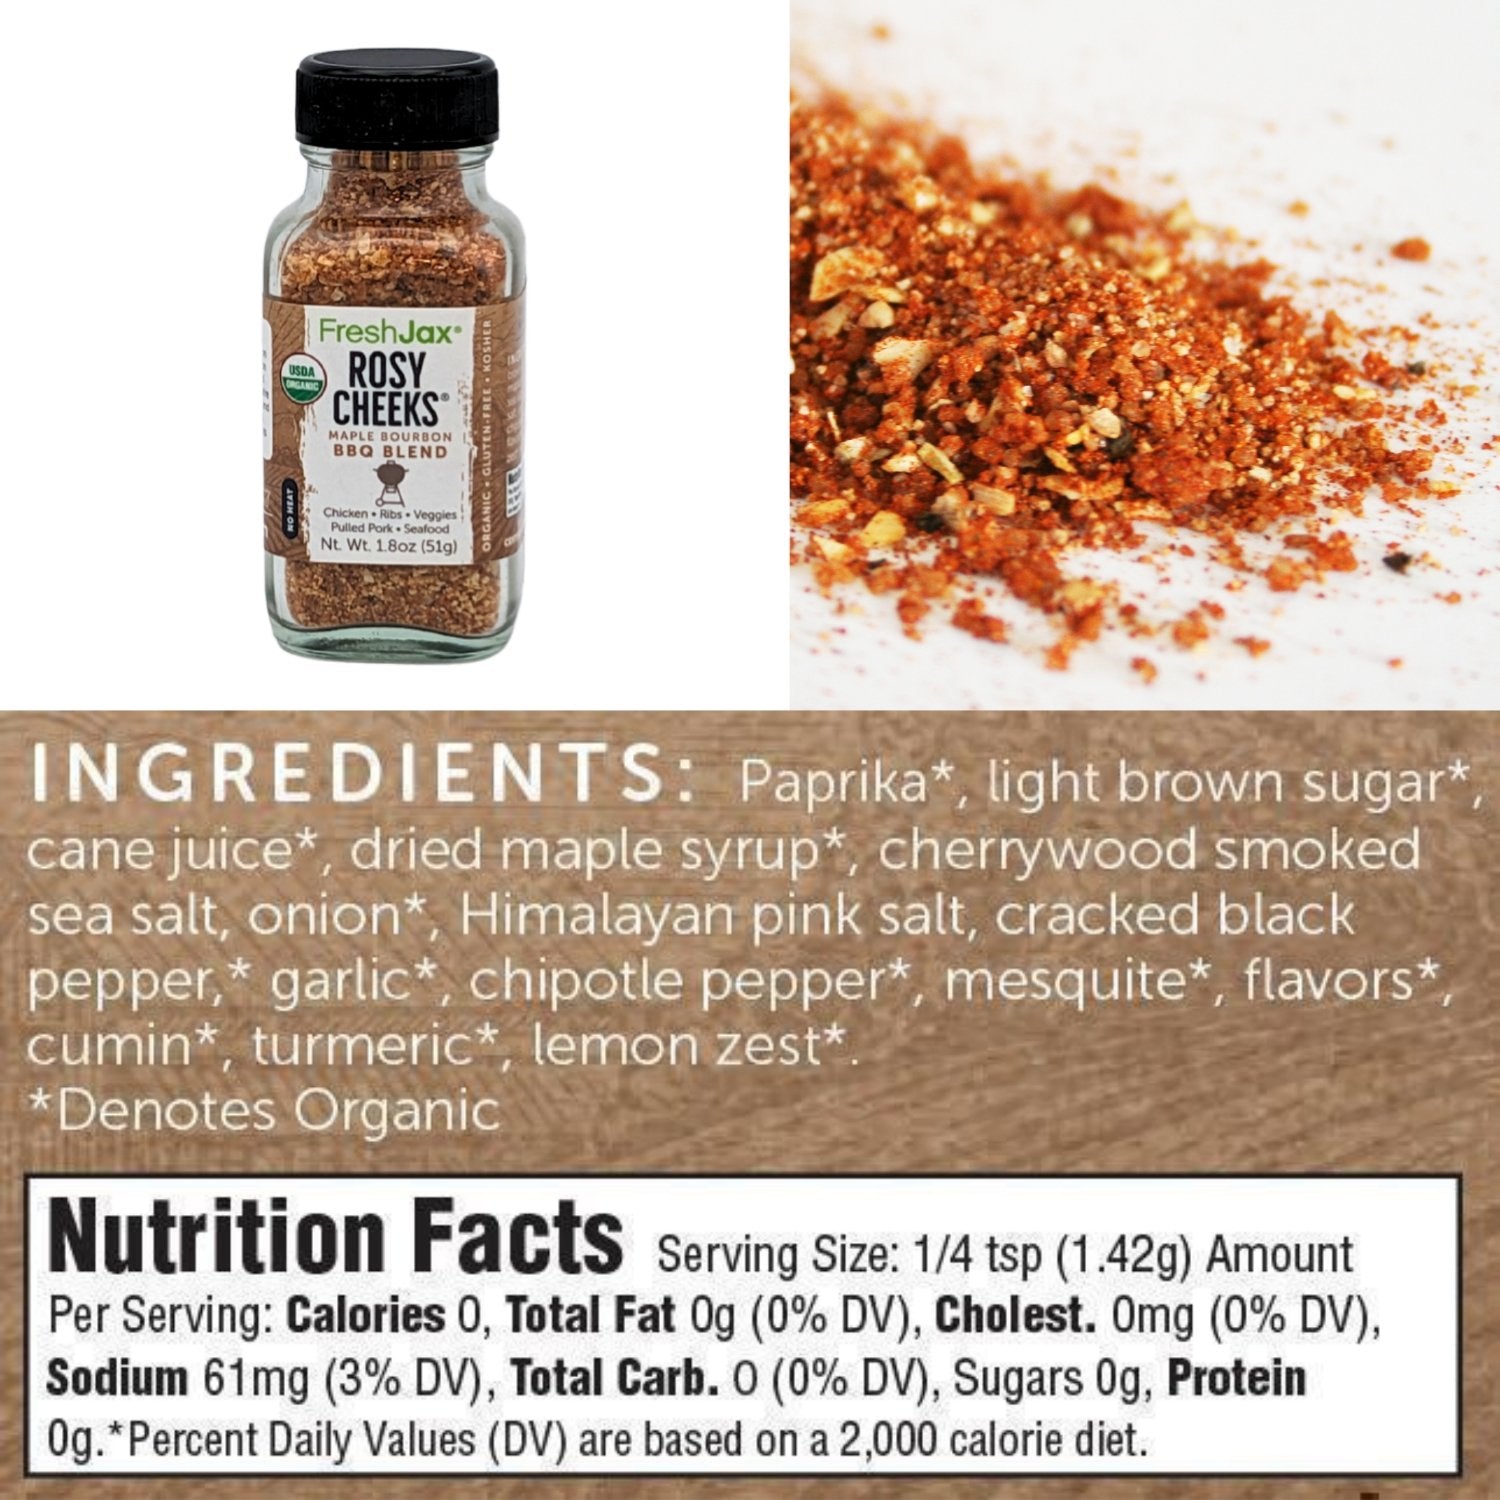 FreshJax Organic Spices Rosy Cheeks Maple Bourbon BBQ Blends Nutrition and Ingredient Information